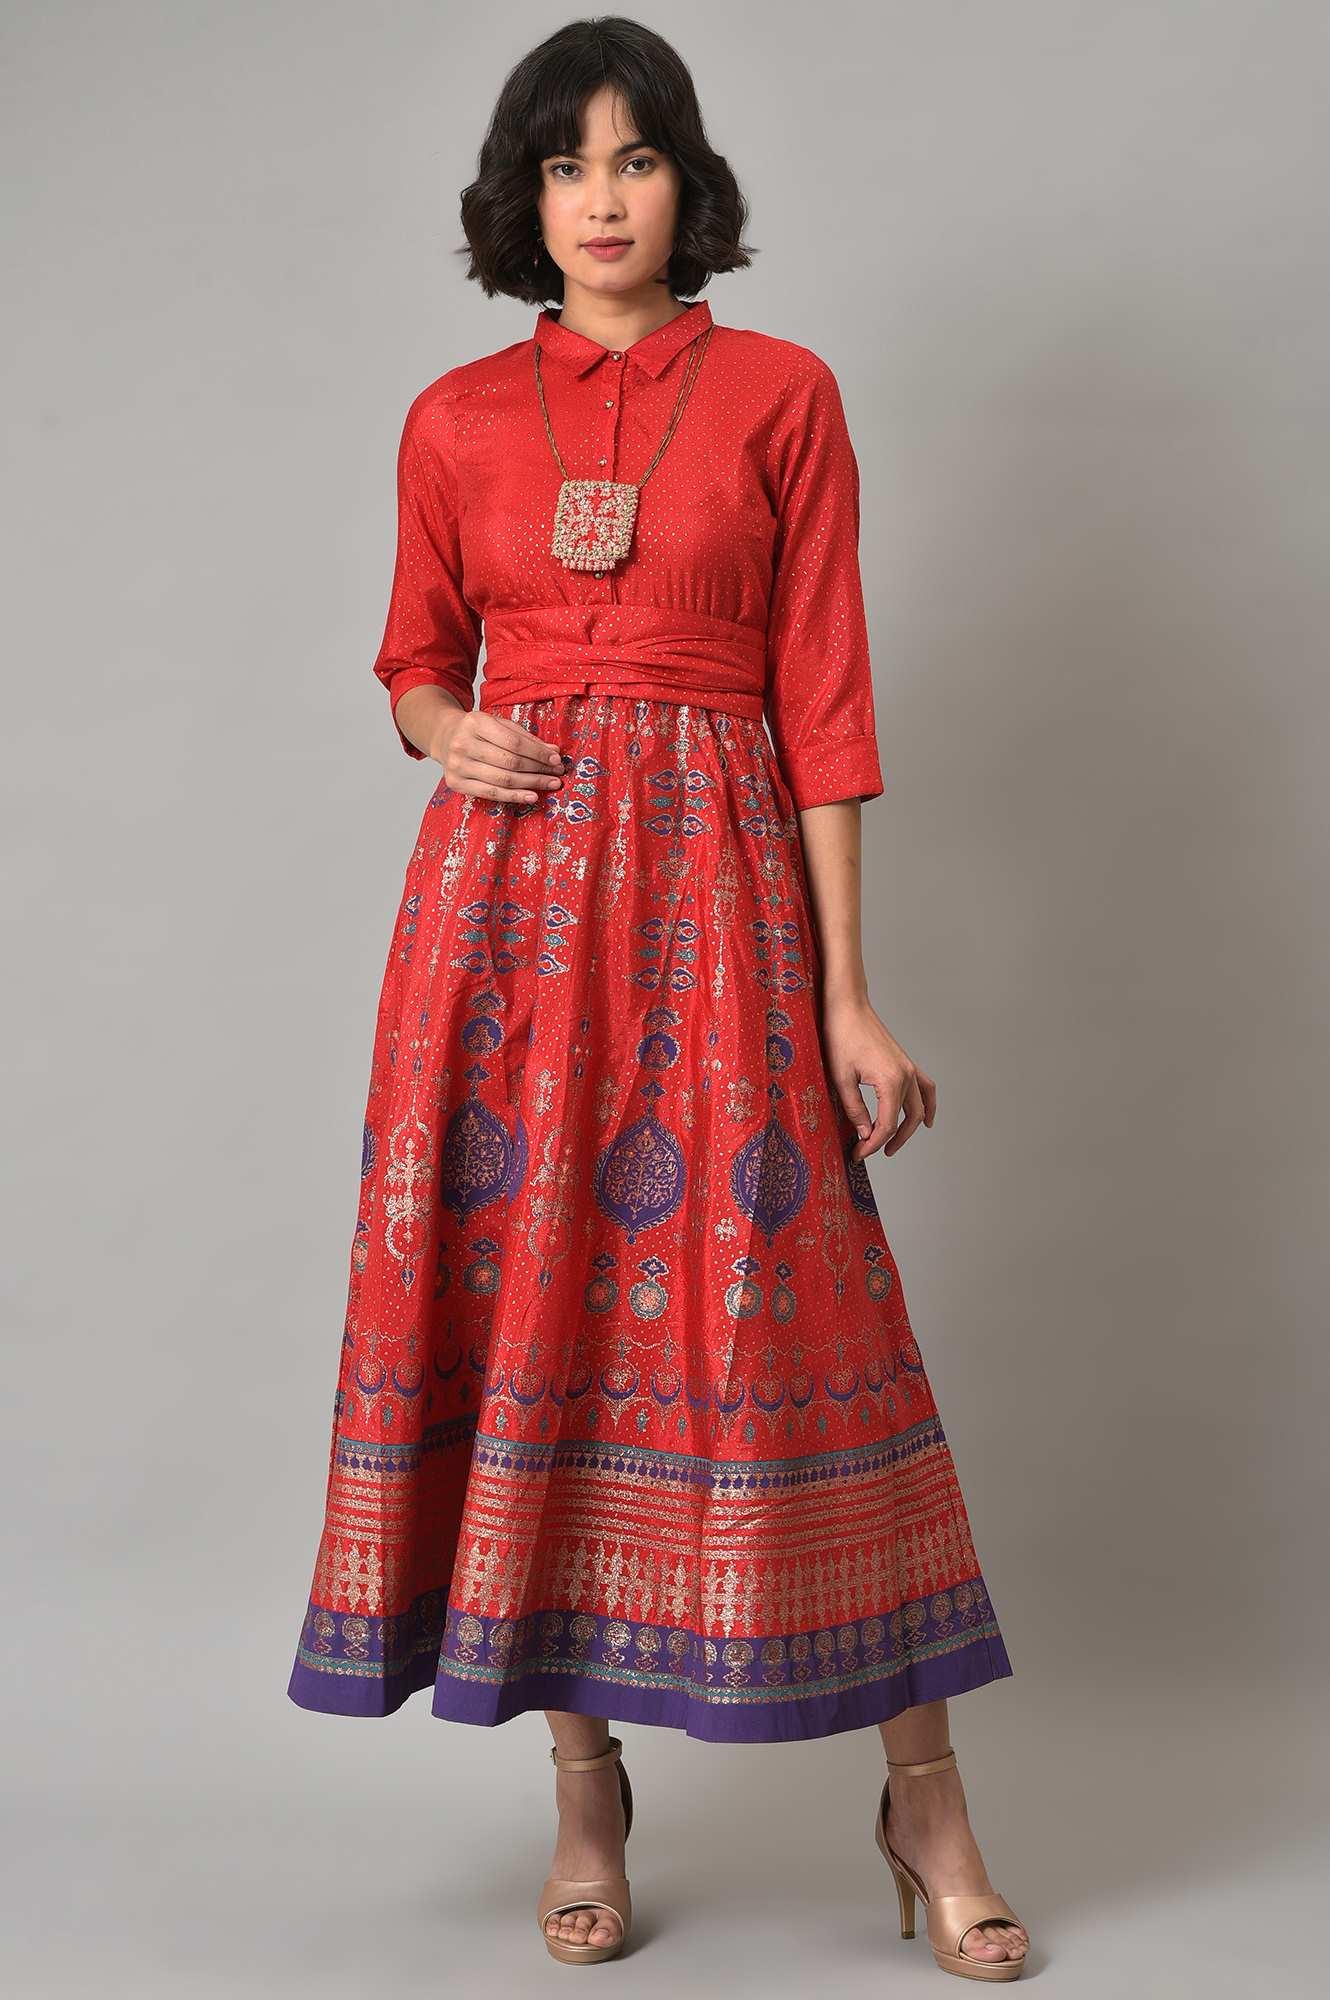 Red Glitter Printed Festive Shirt Dress With Placket - wforwoman